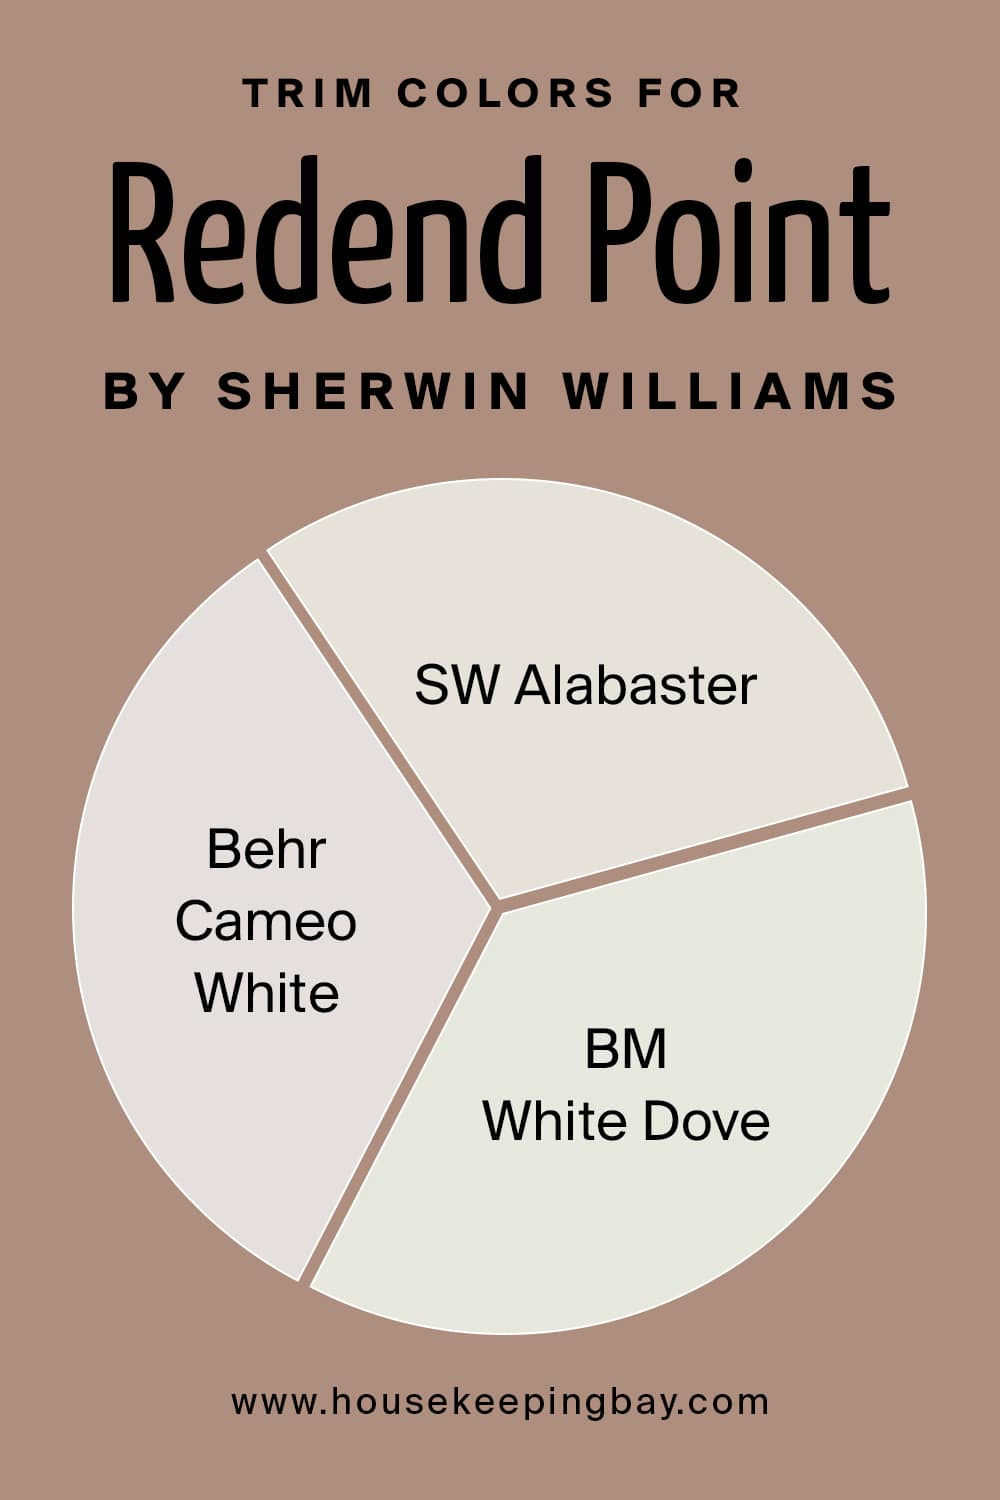 Trim Colors for Redend Point by Sherwin Williams